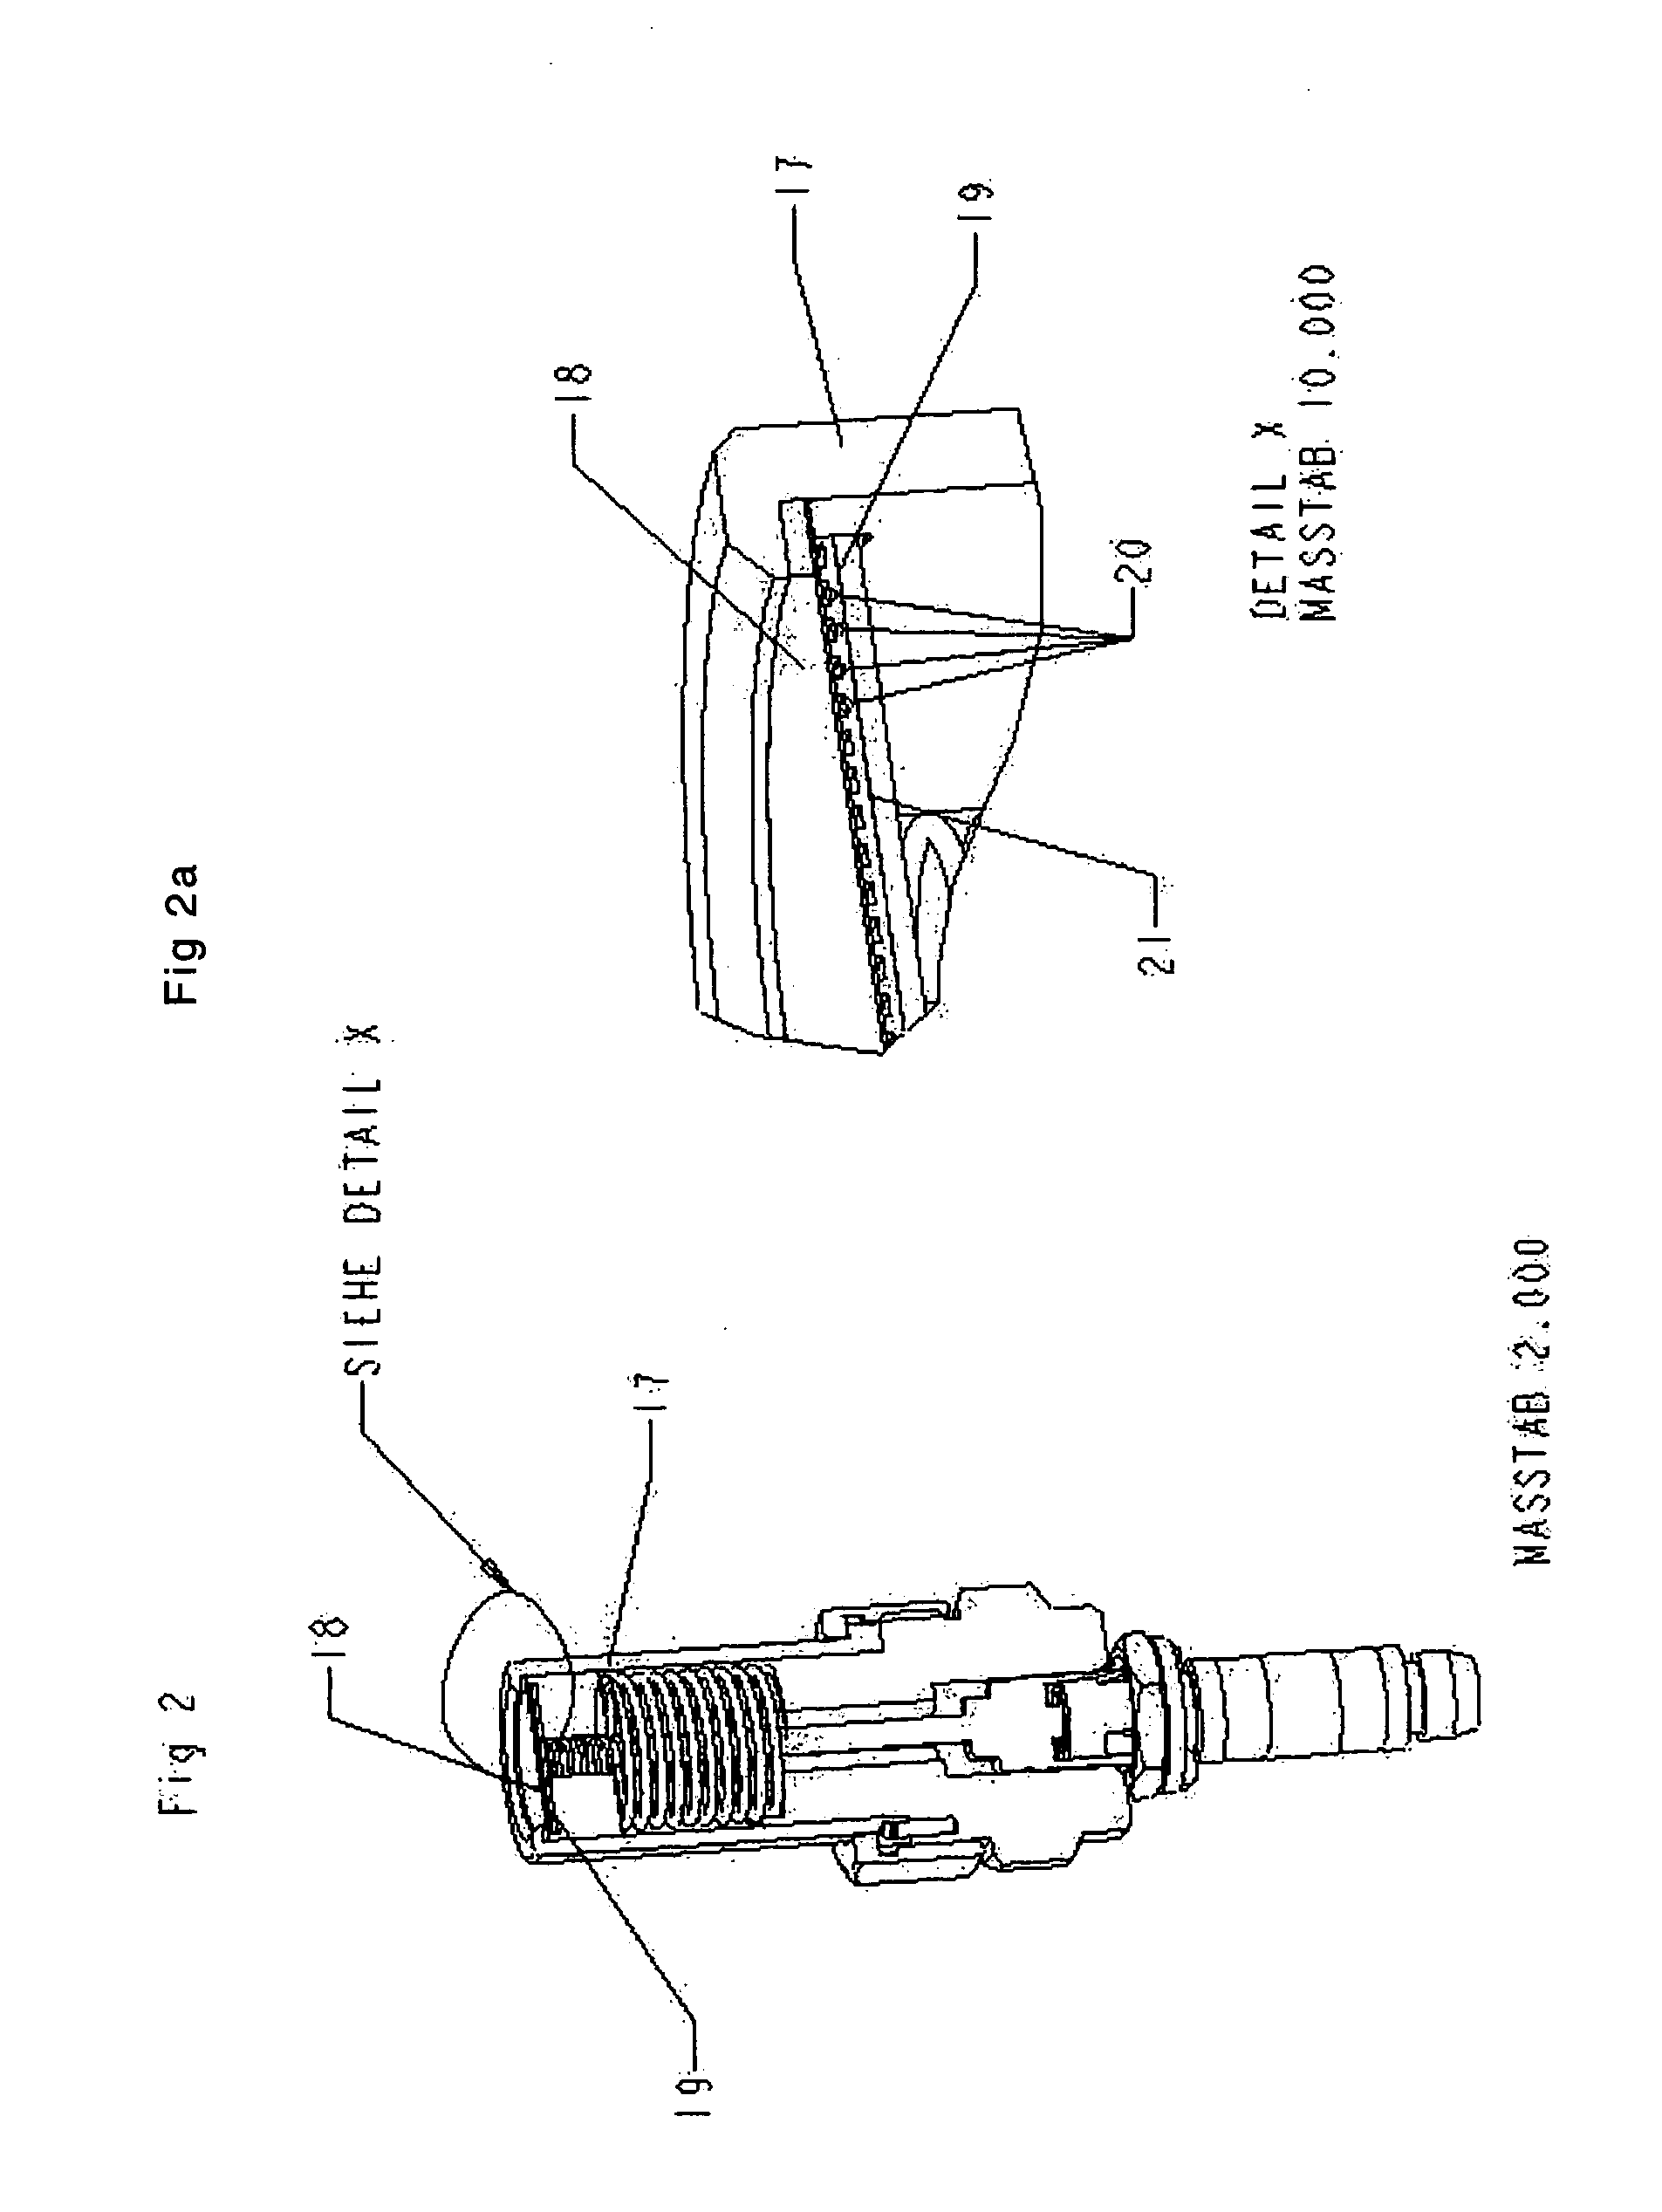 Ultrasonic gas flowmeter as well as device to measure exhaust flows of internal combustion engines and method to determine flow of gases